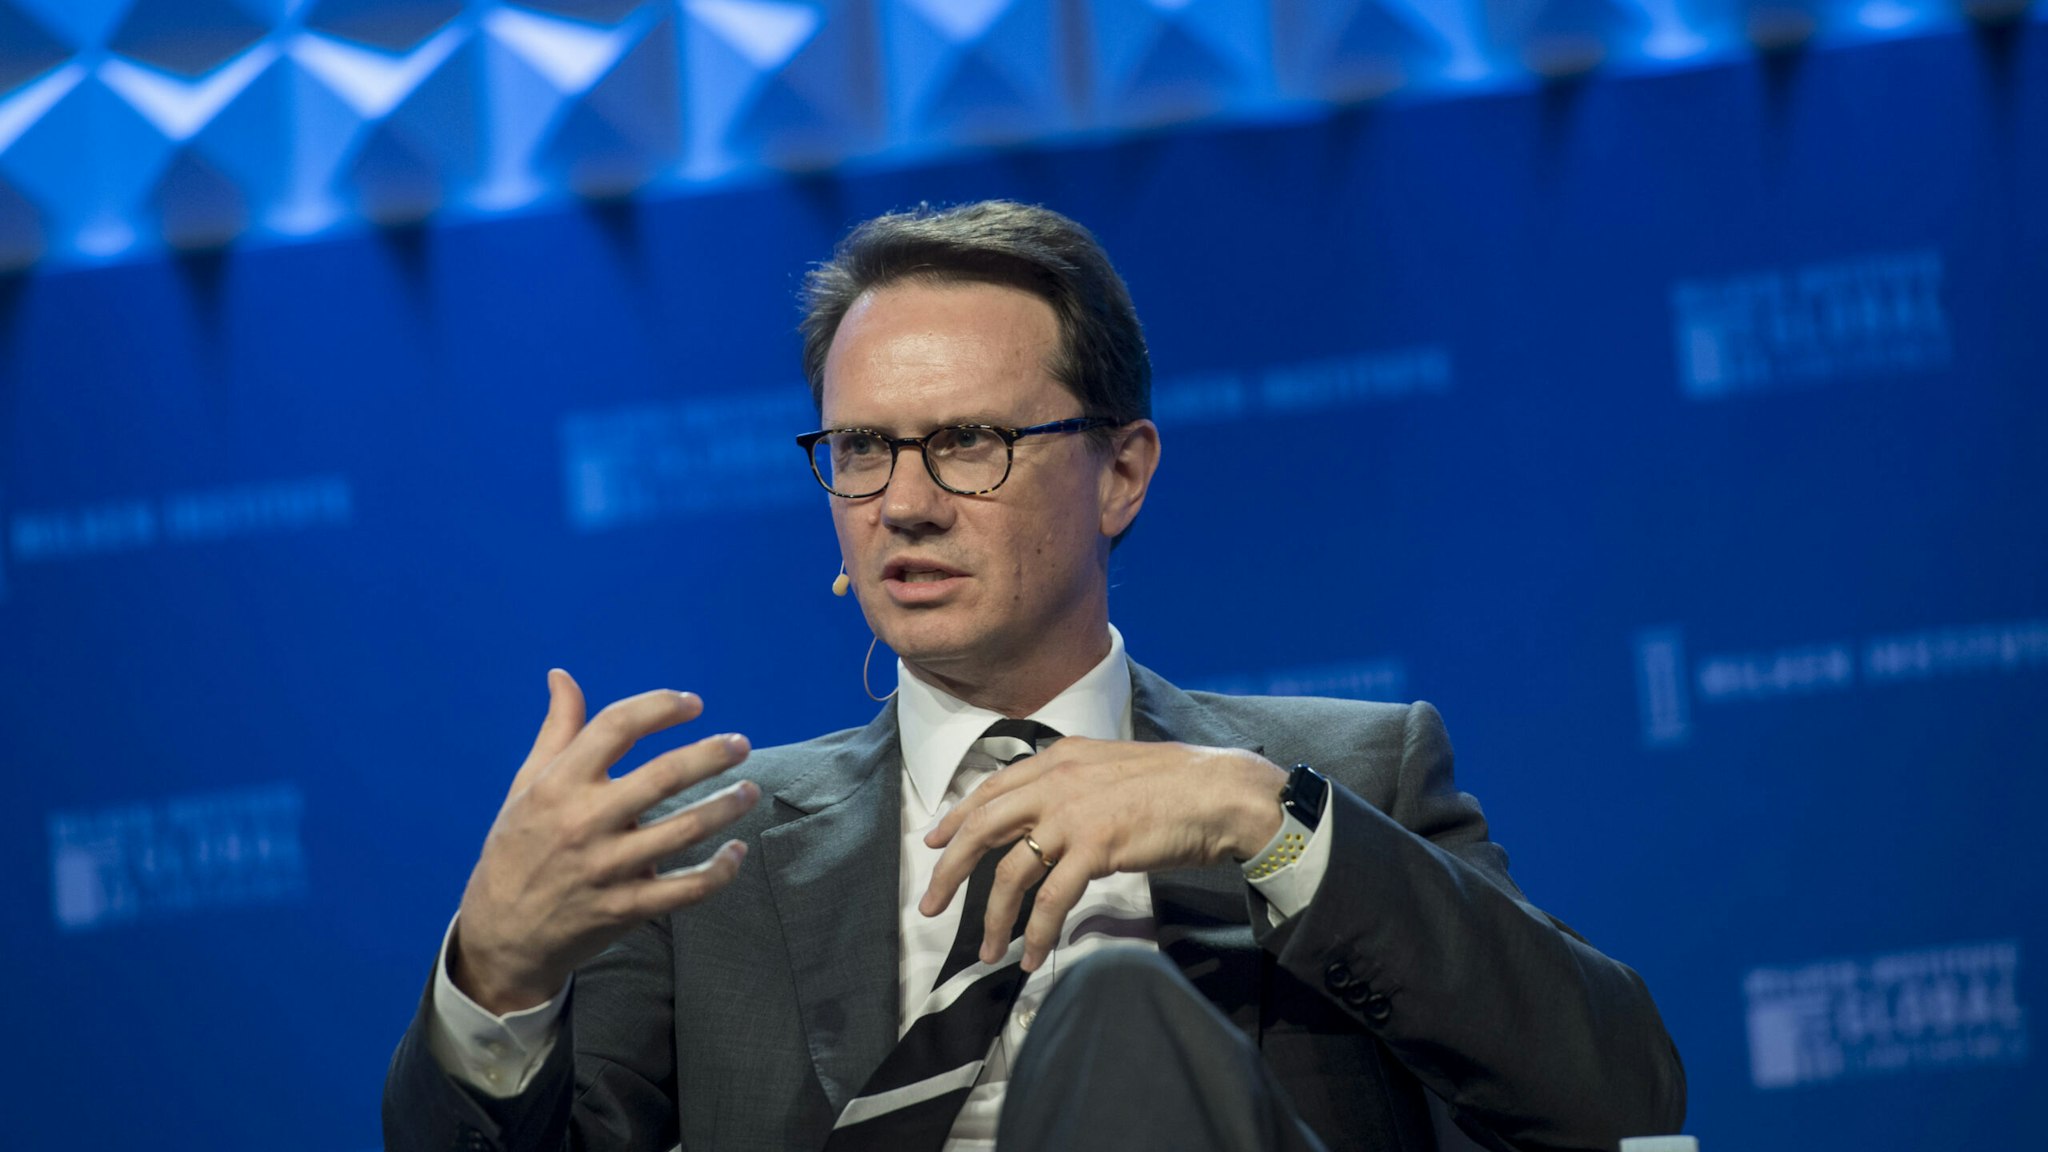 Peter Rice, chairman and chief executive officer of Fox Networks Group Inc., speaks at the Milken Institute Global Conference in Beverly Hills, California, U.S., on Wednesday, May 3, 2017.